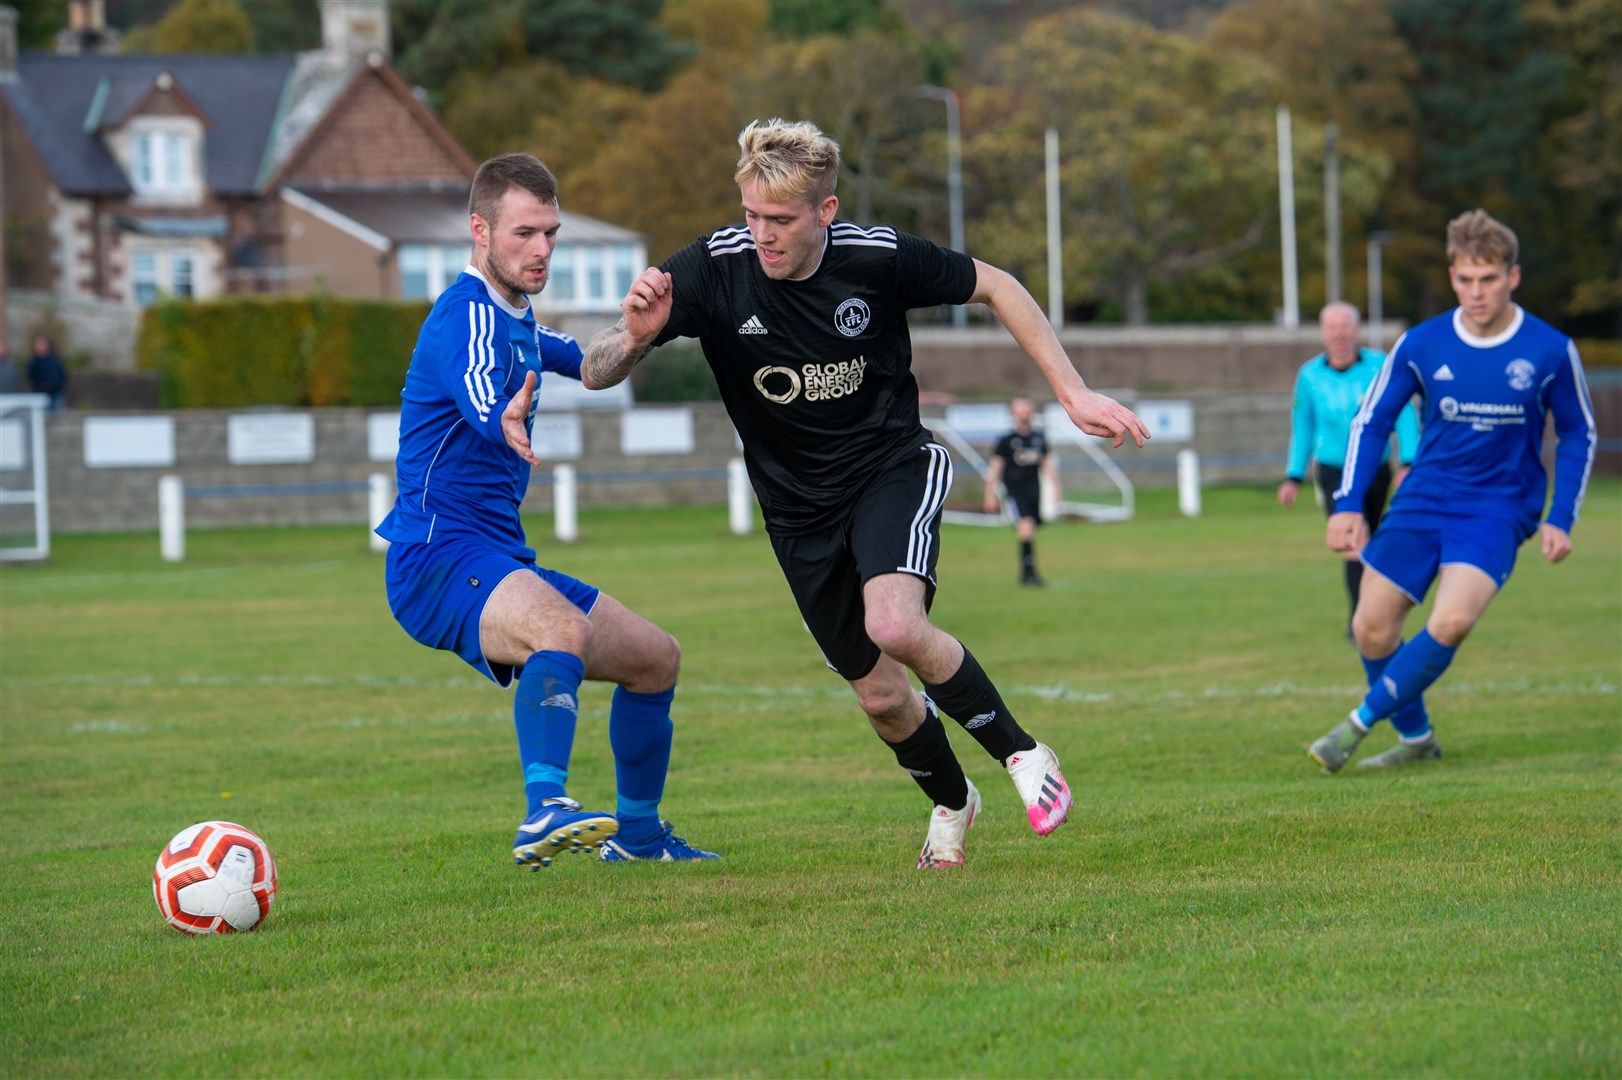 The North Caledonian League will aim to restart on February 6. Picture: Callum Mackay